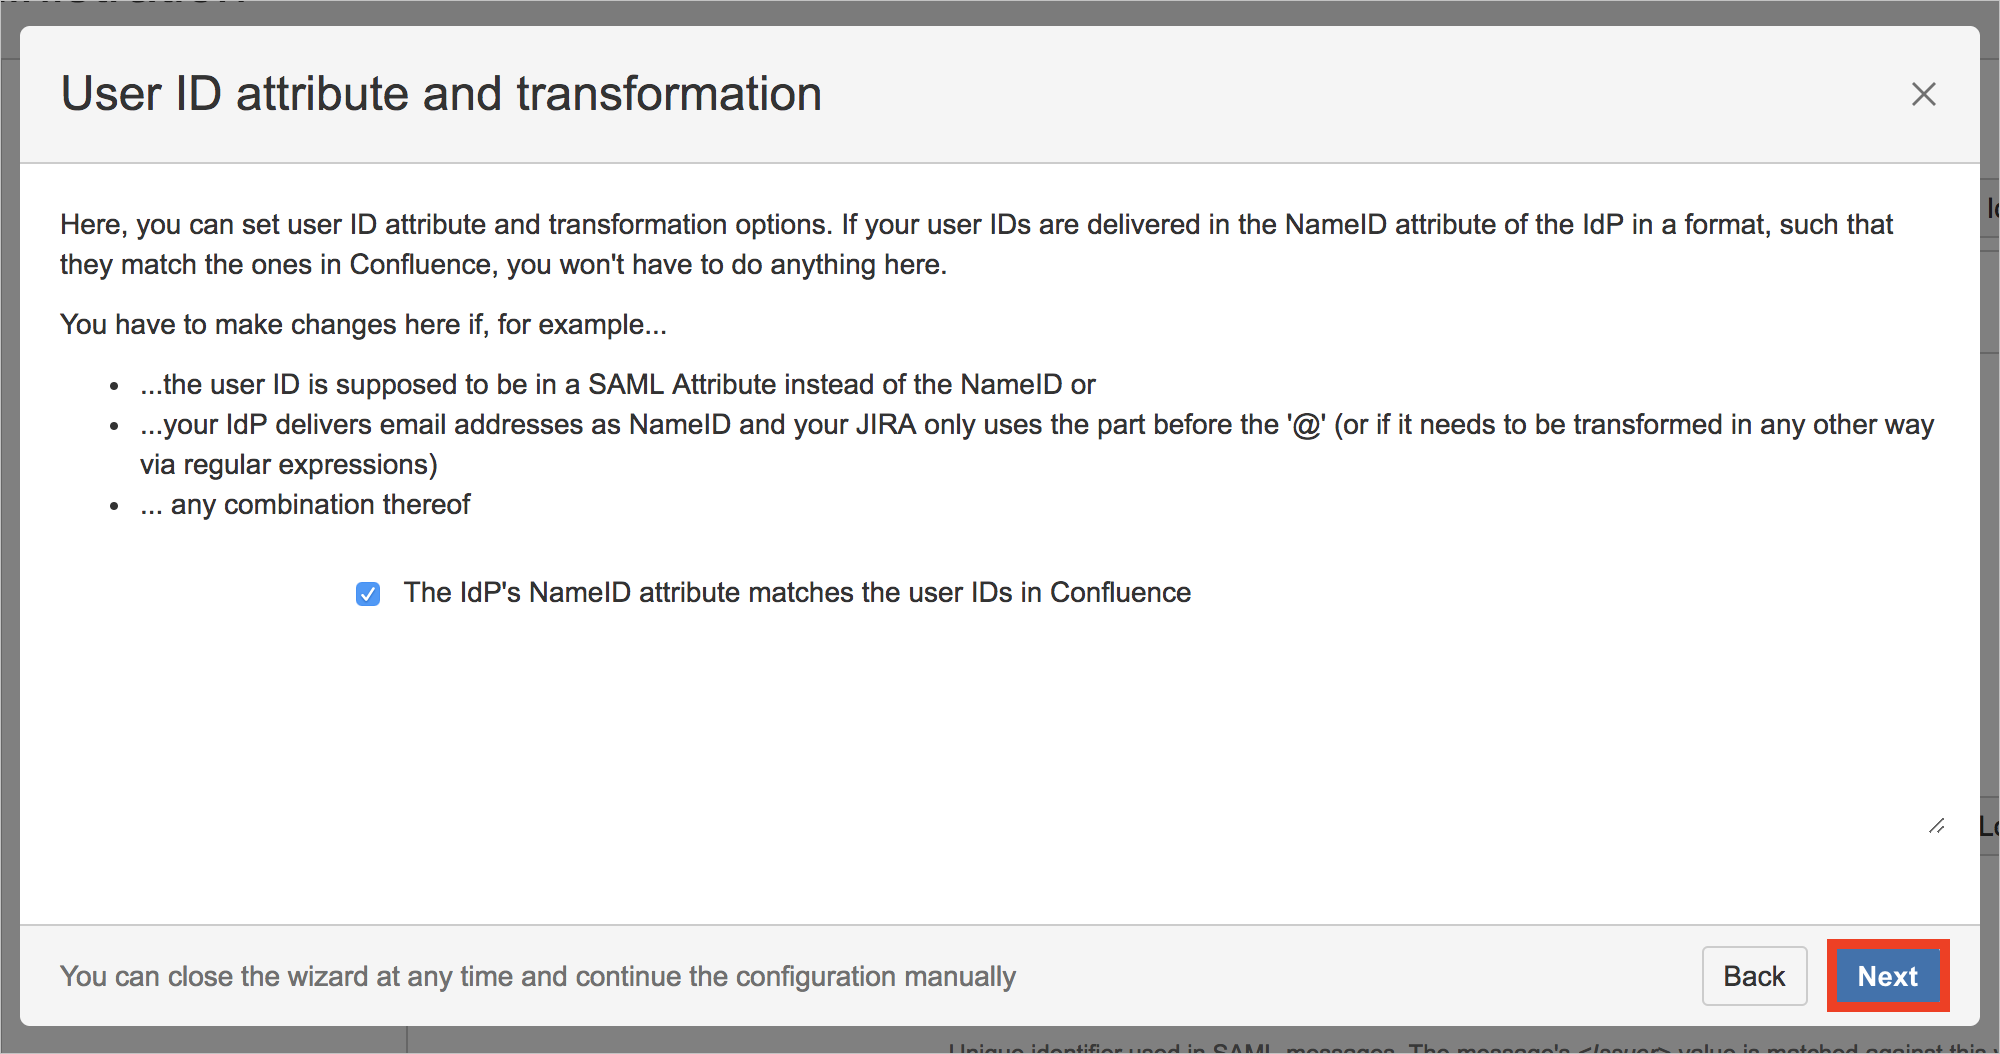 Screenshot that shows the "User ID attribute and transformation" page with the "Next" button selected.